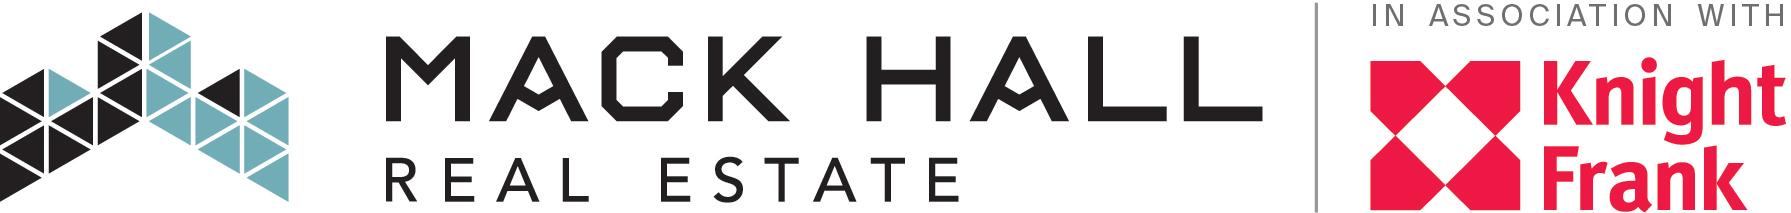 Mack Hall Real Estate in Association with Knight Frank